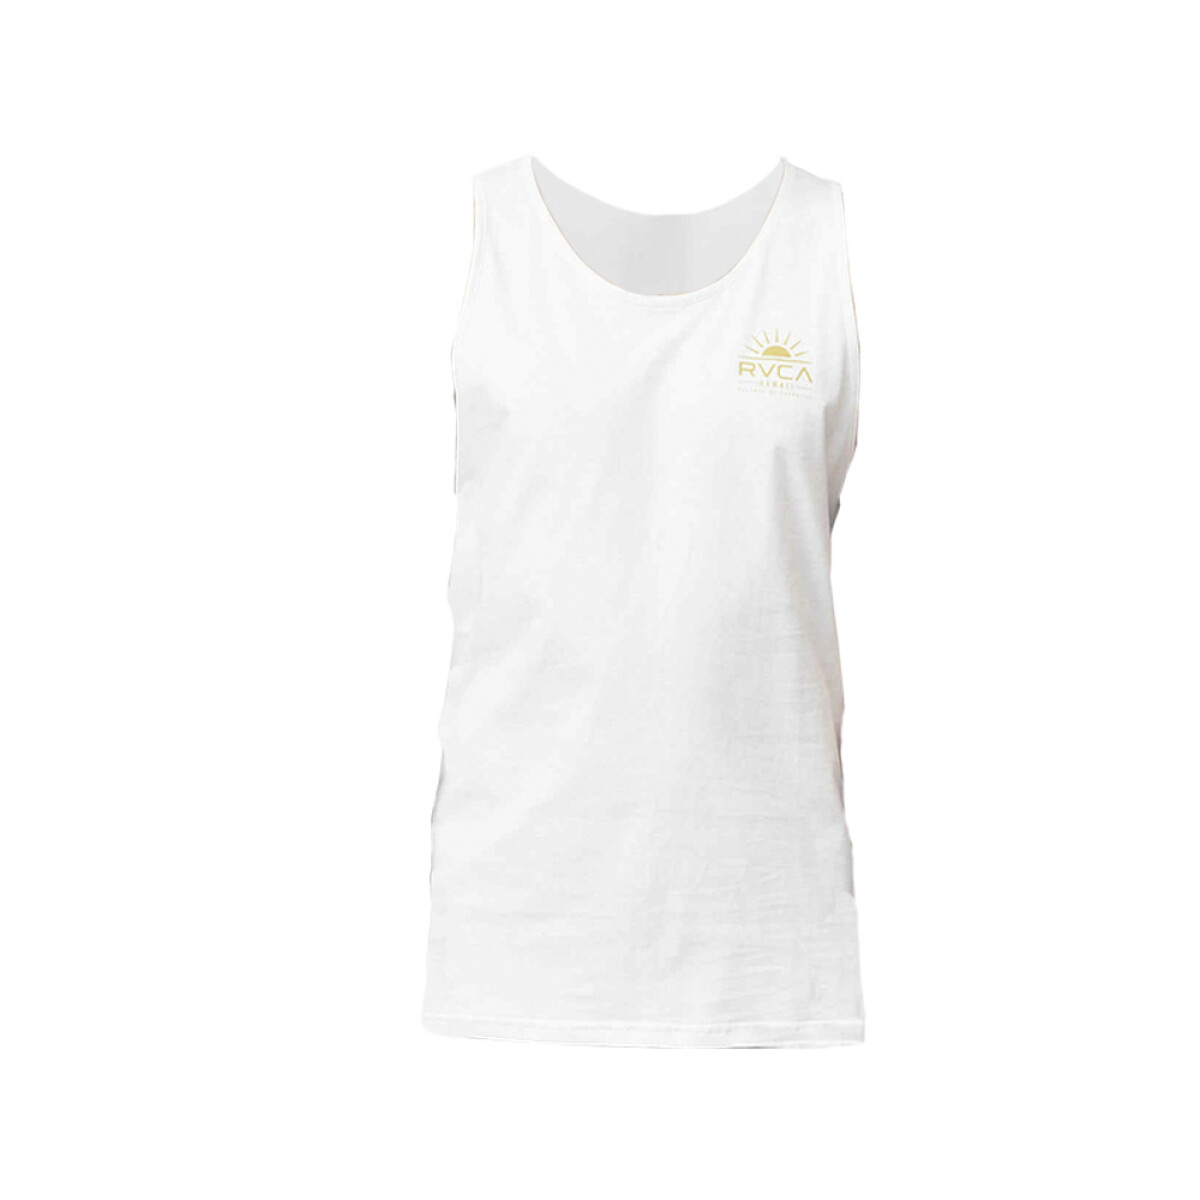 MUSCULOSA NEW DAY SINGLET - WHITE 